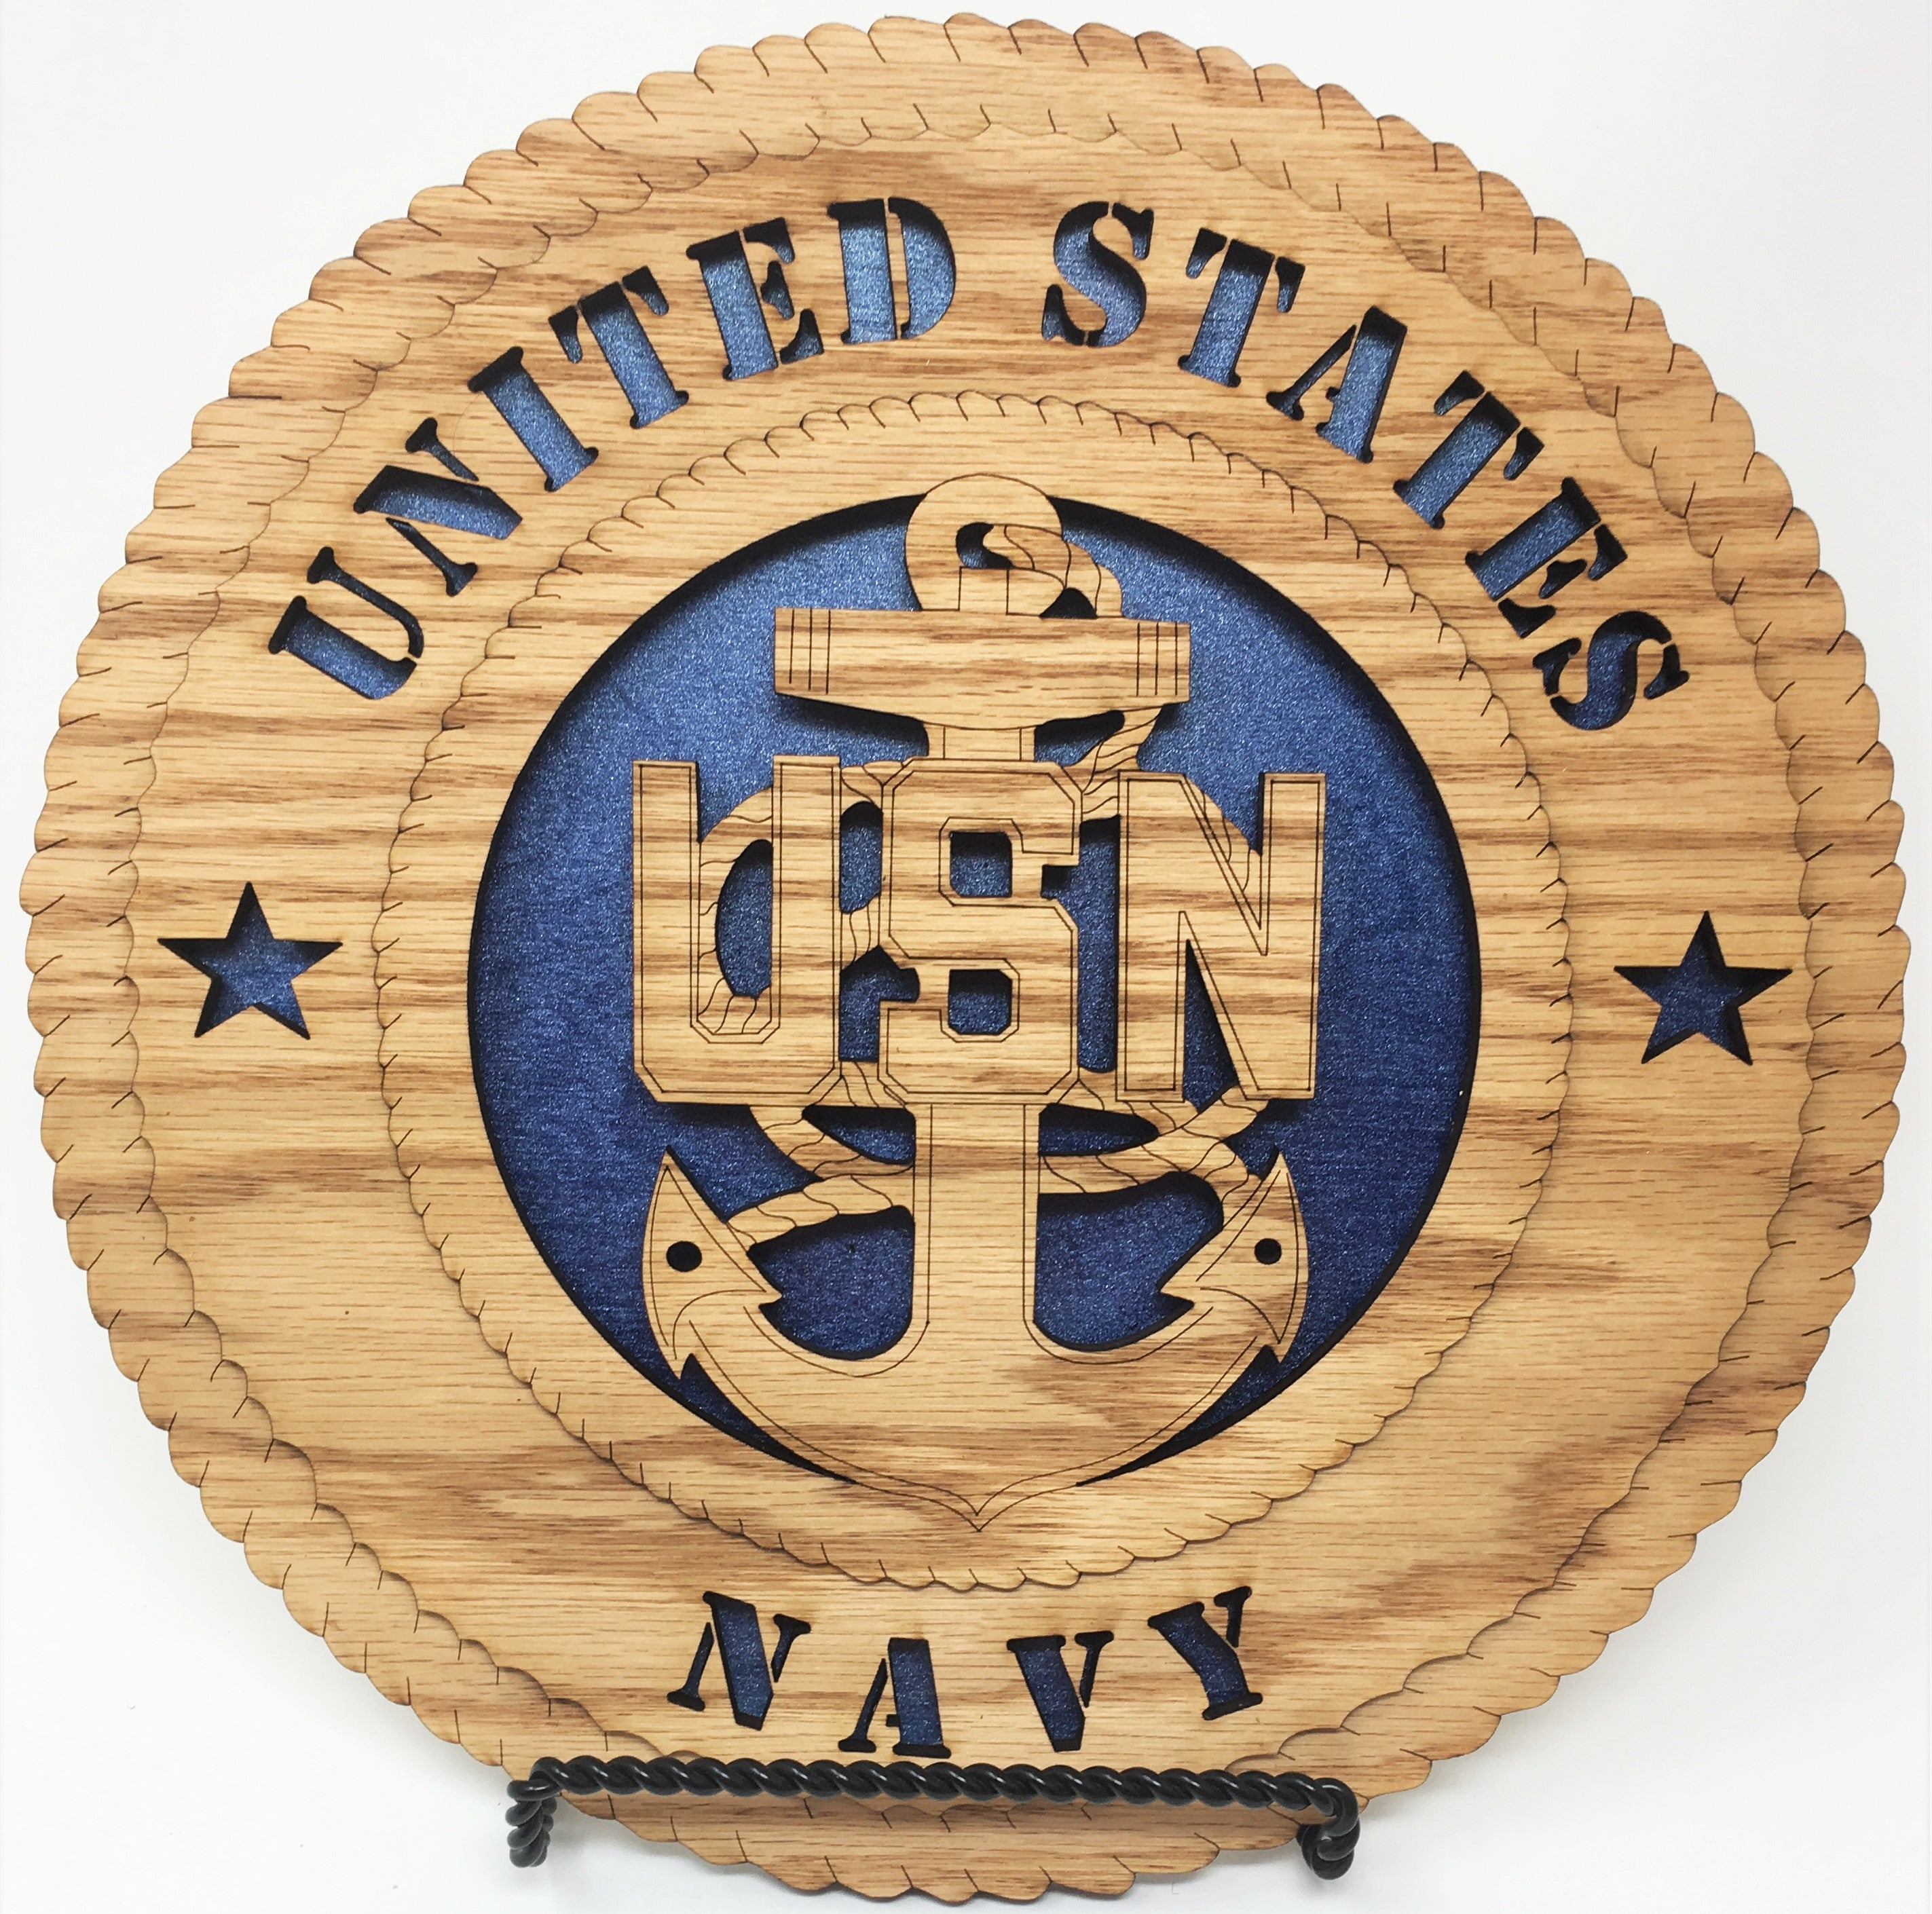 Laser Pics and Gifts: 12" Standard Navy Plaque - Laser Pics & Gifts